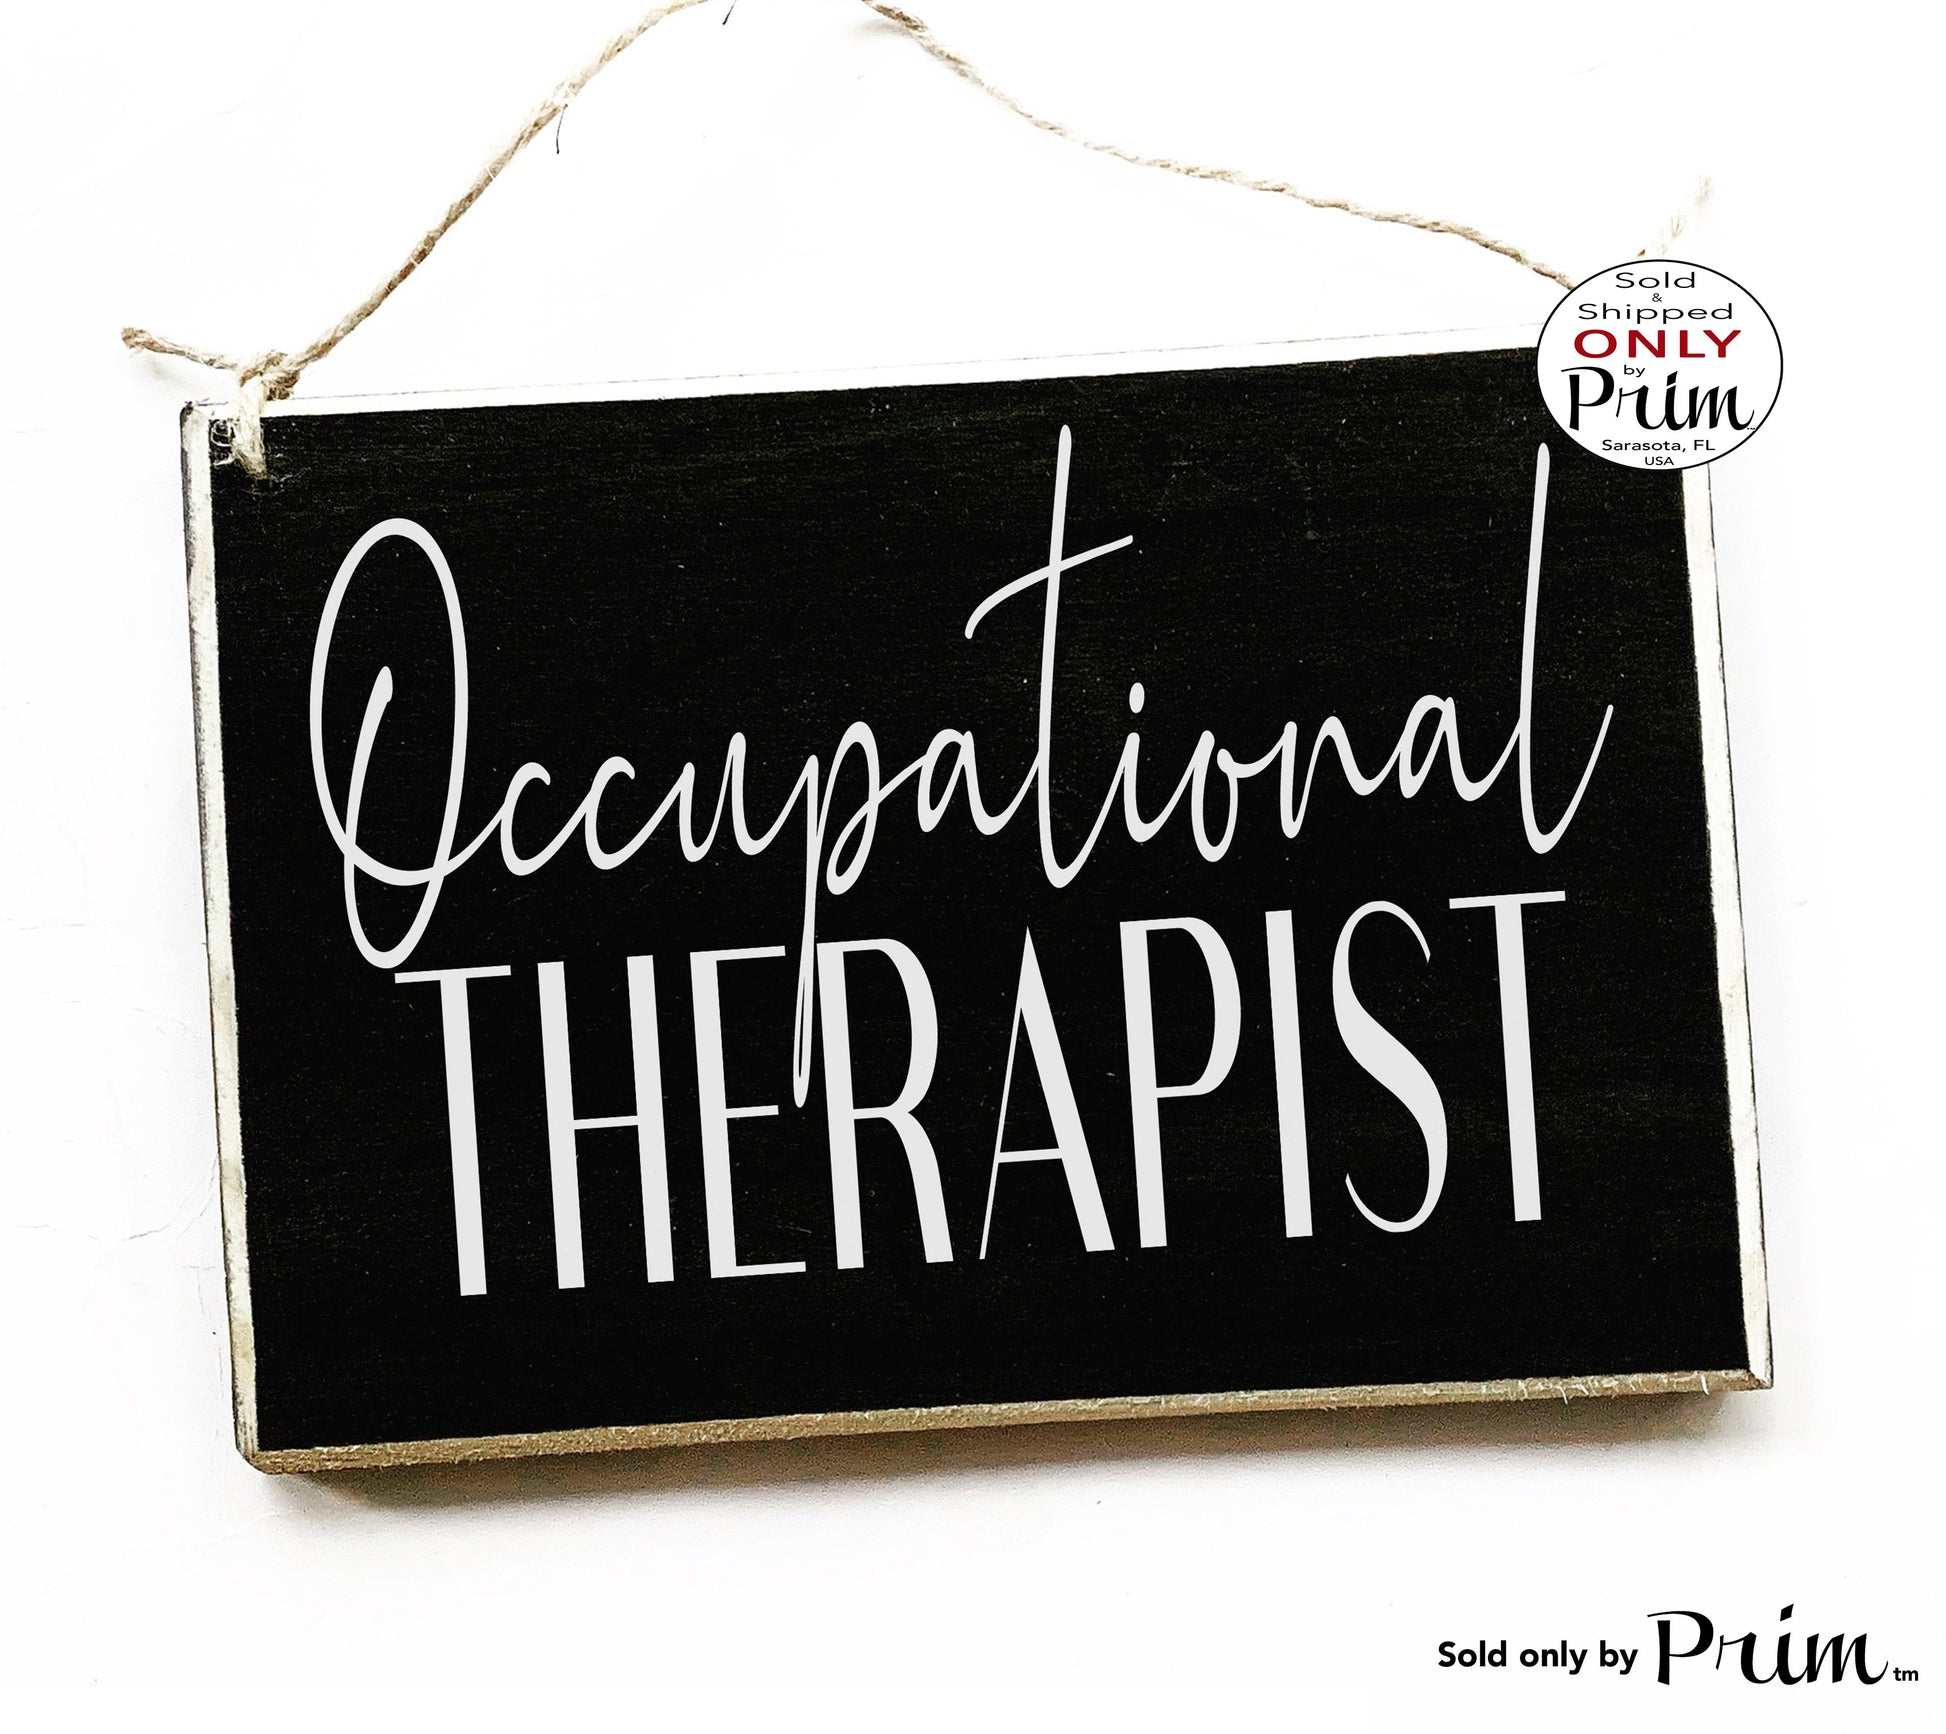 Designs by Prim 8x6 Occupational Therapist Custom Wood Sign Therapy Room OT Counselor Pediatric Sensory Certified Therapist Name Job Title Door Plaque